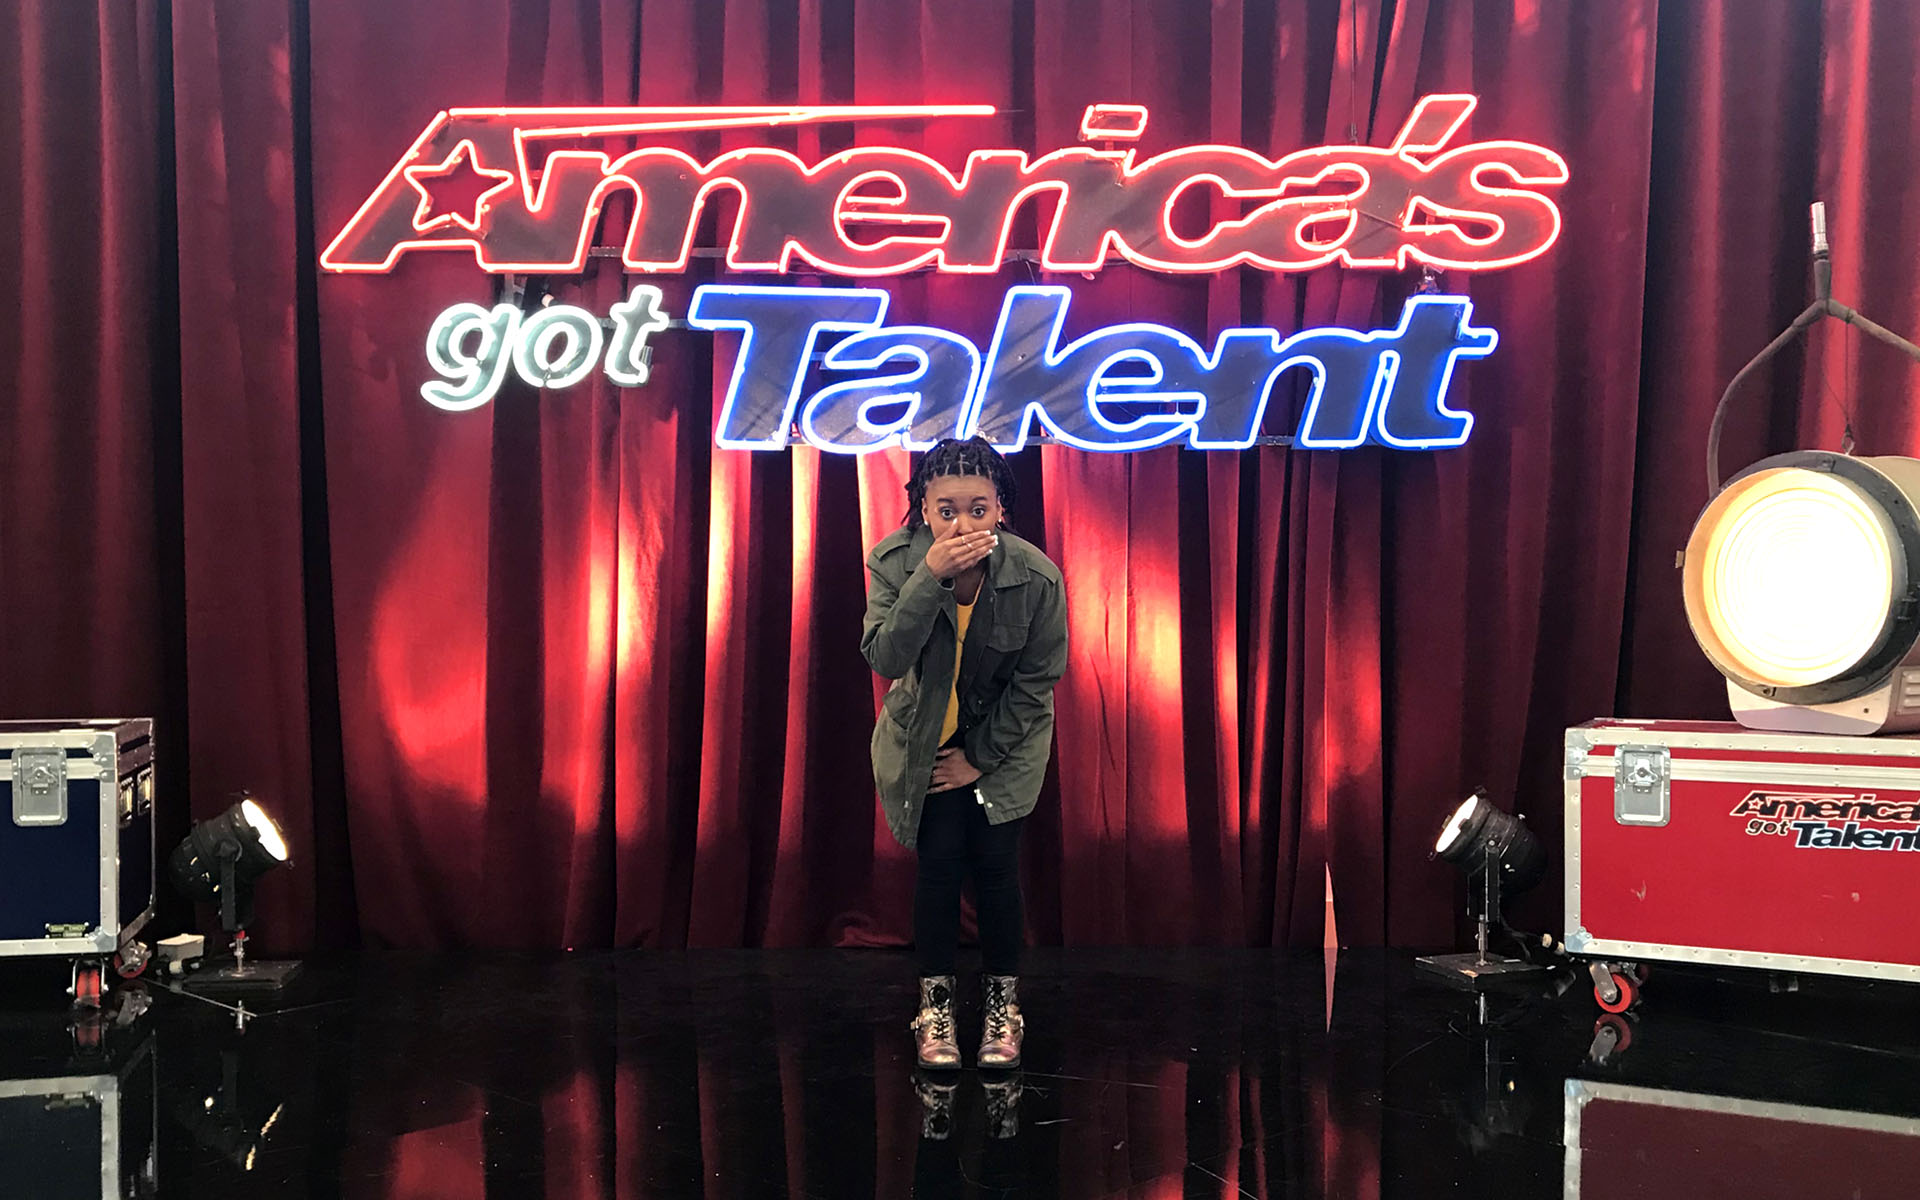 Breanna Dickerson auditioning for America's Got Talent